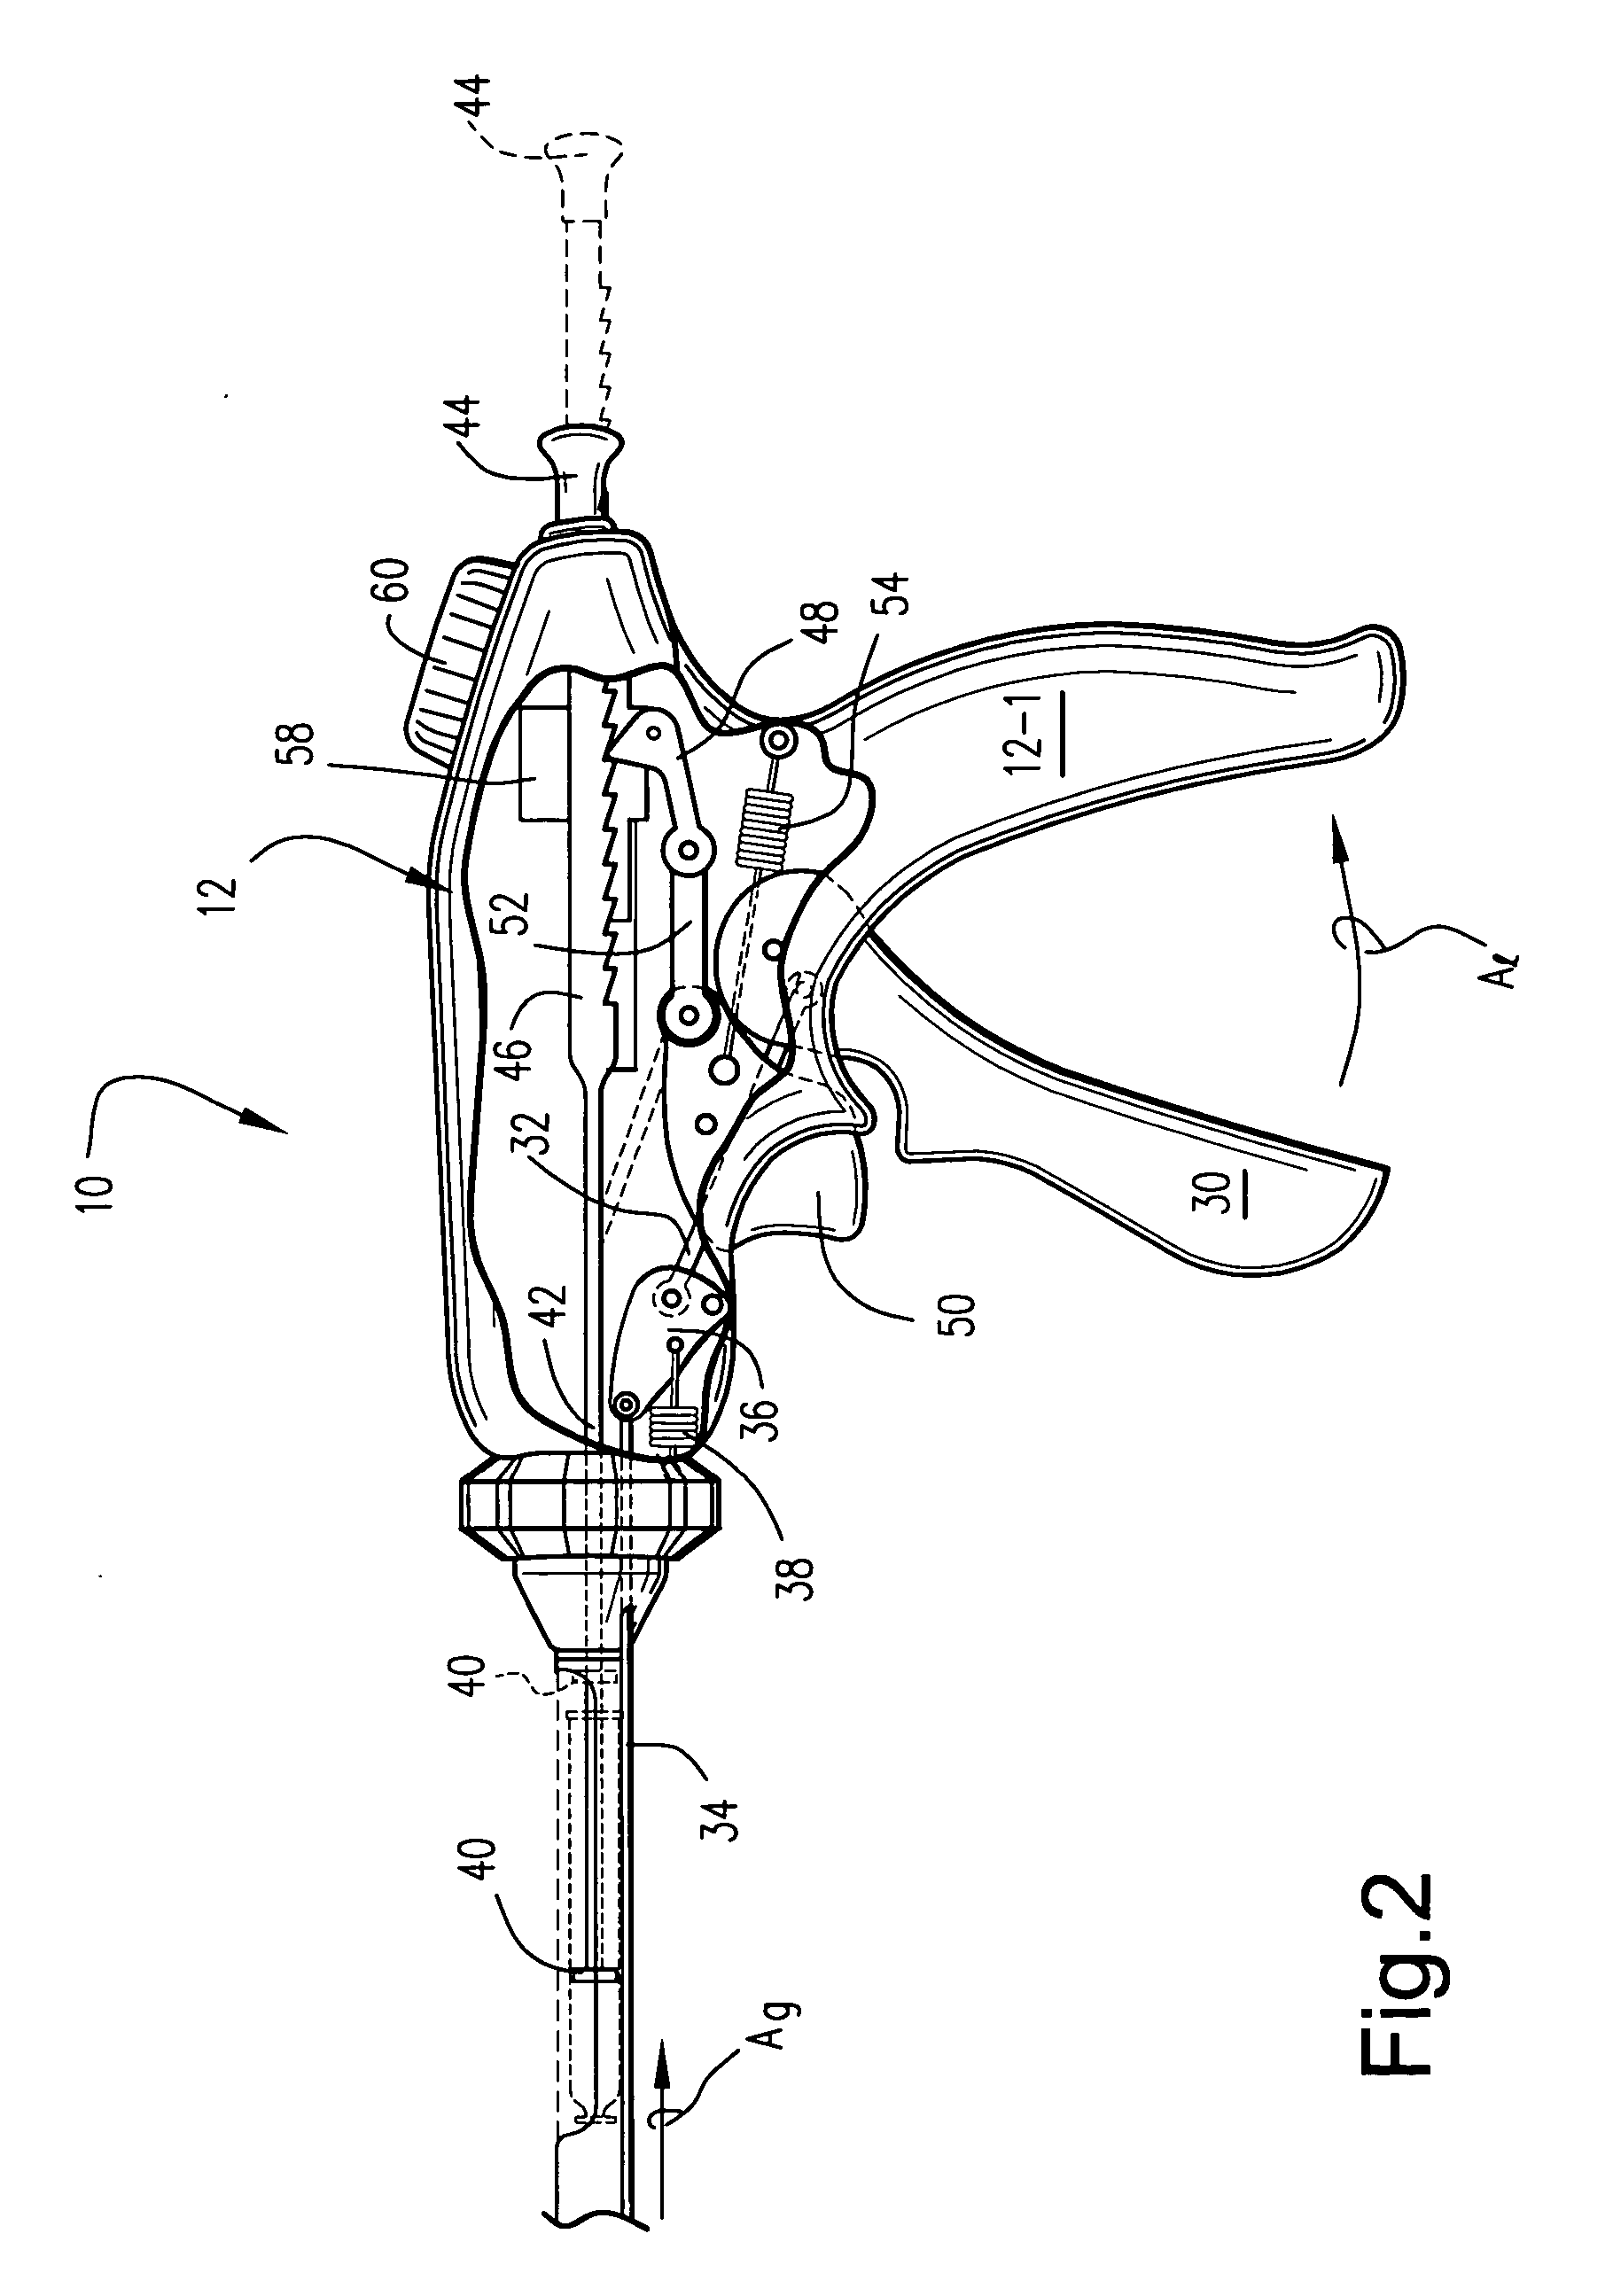 Minimally invasive injection devices and methods